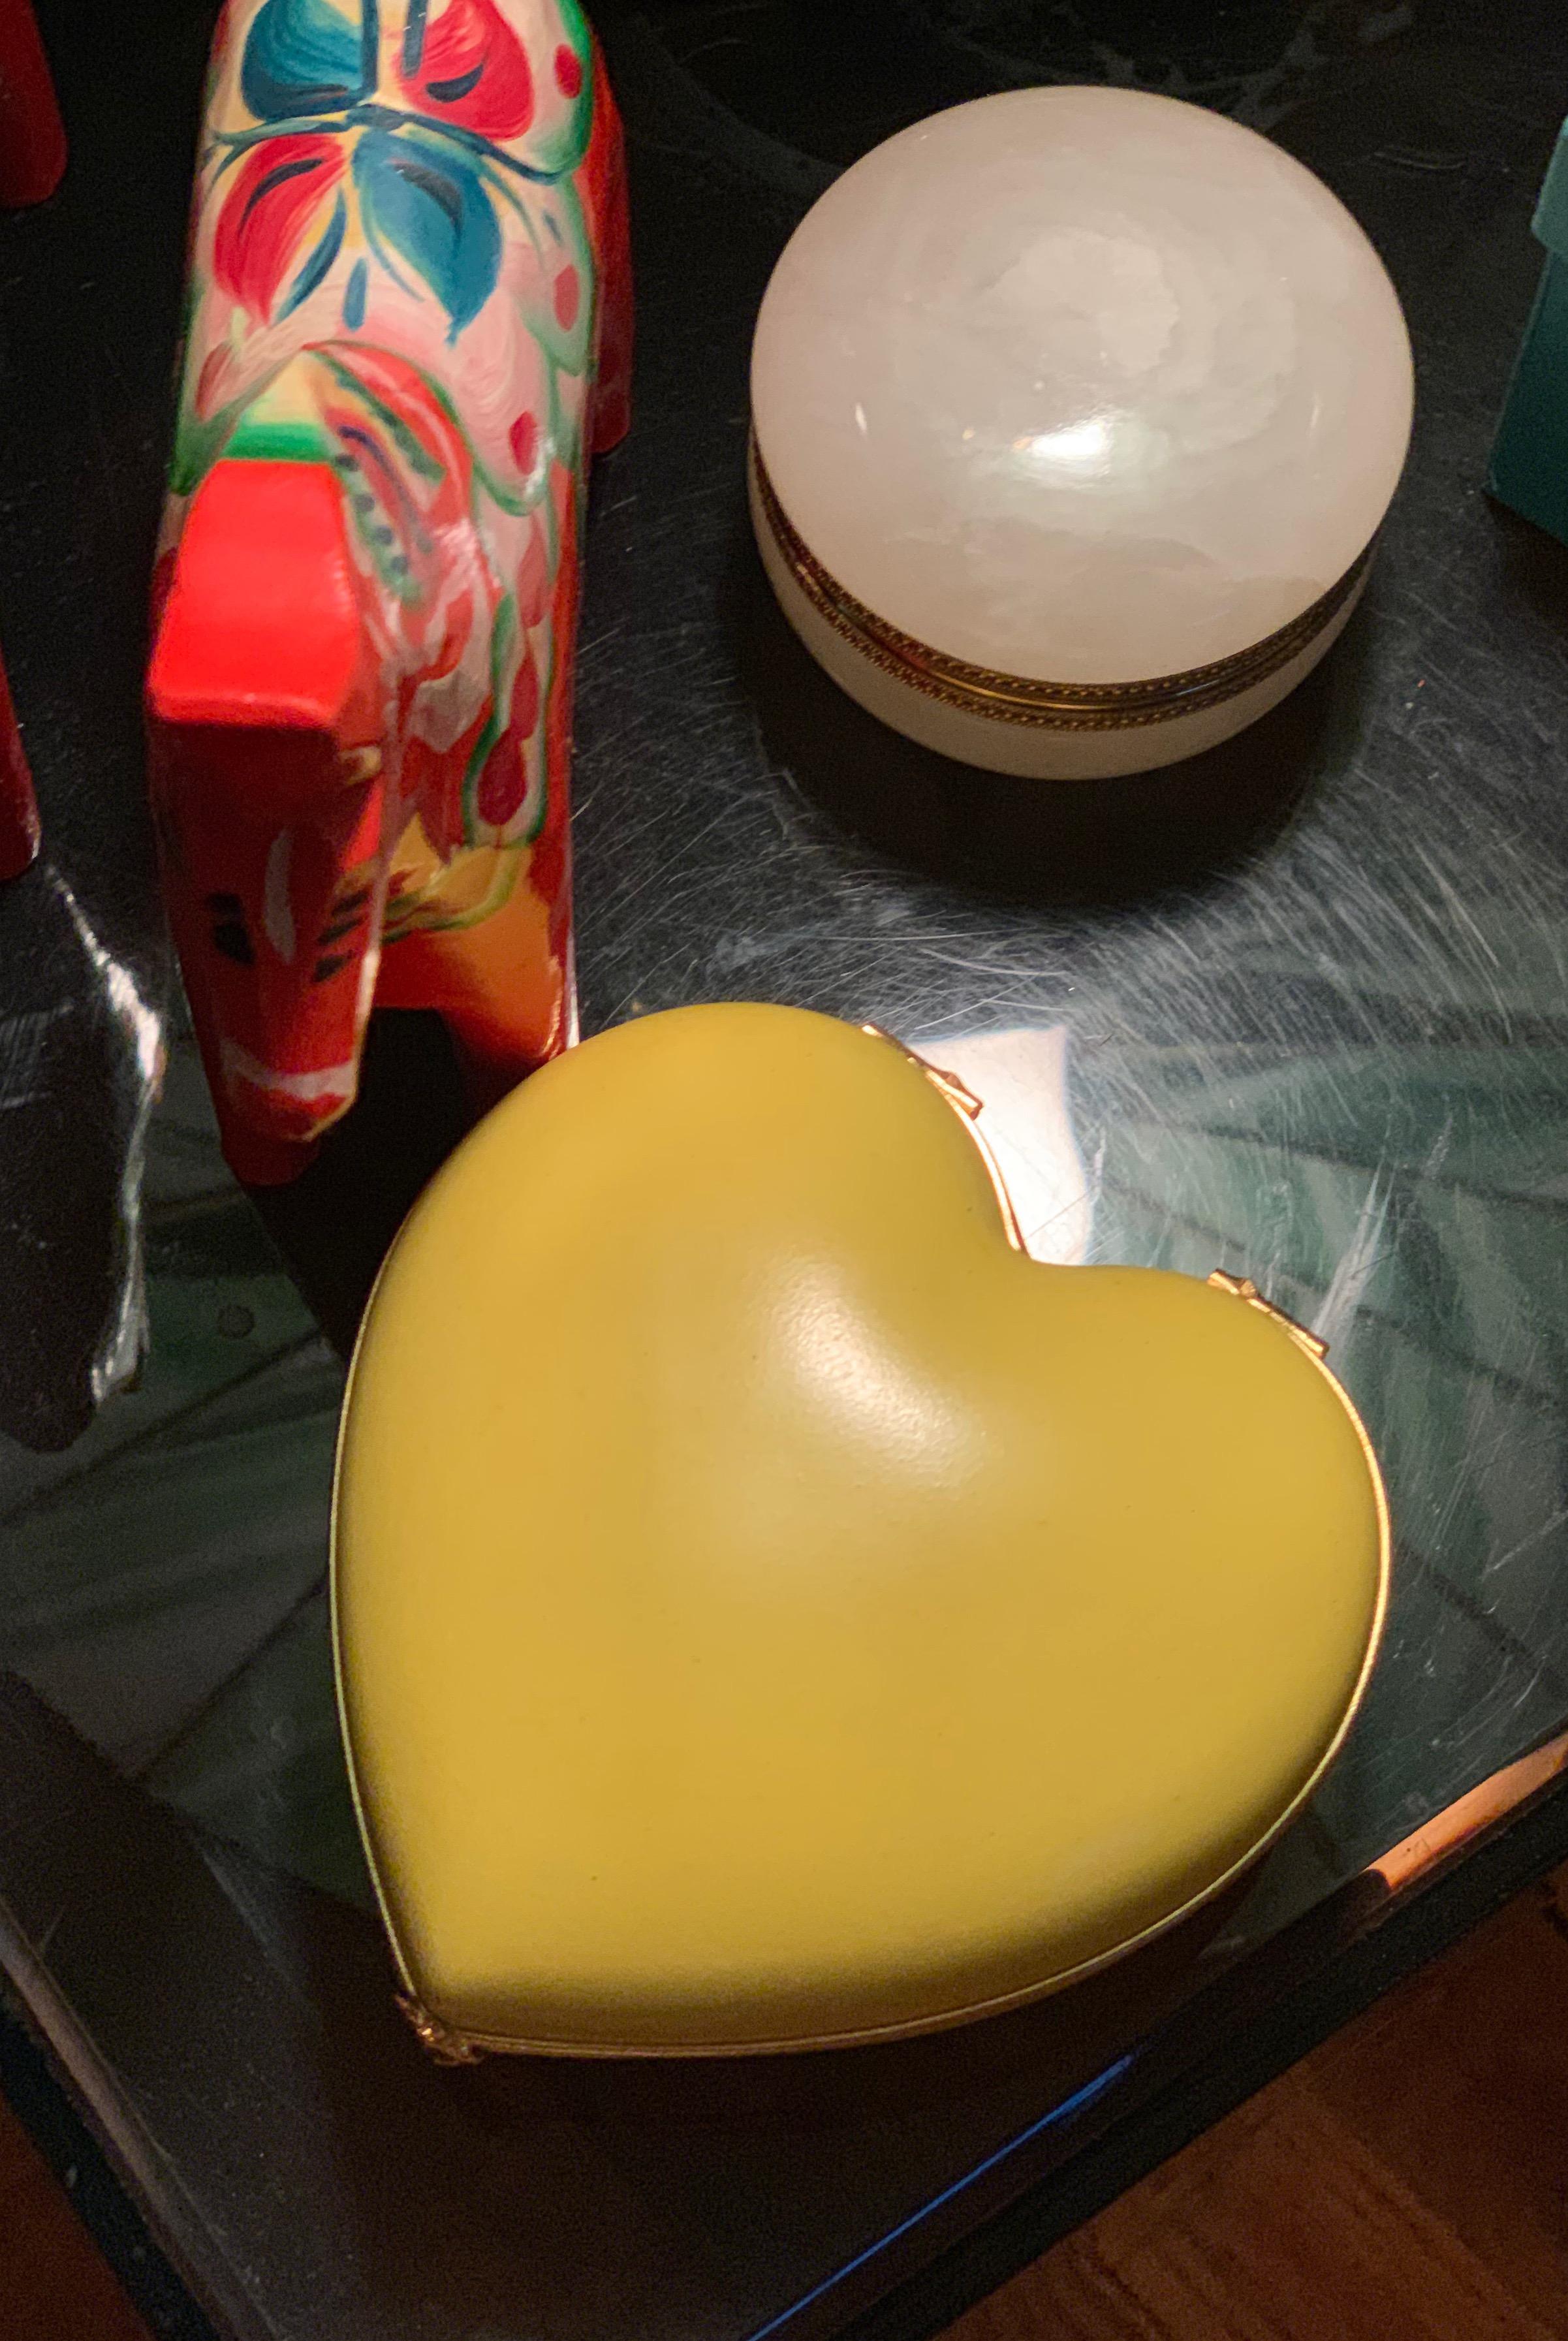 20th Century Limoges Porcelain Heart Trinket Box, Canary Yellow, French Porcelain Jewelry Box